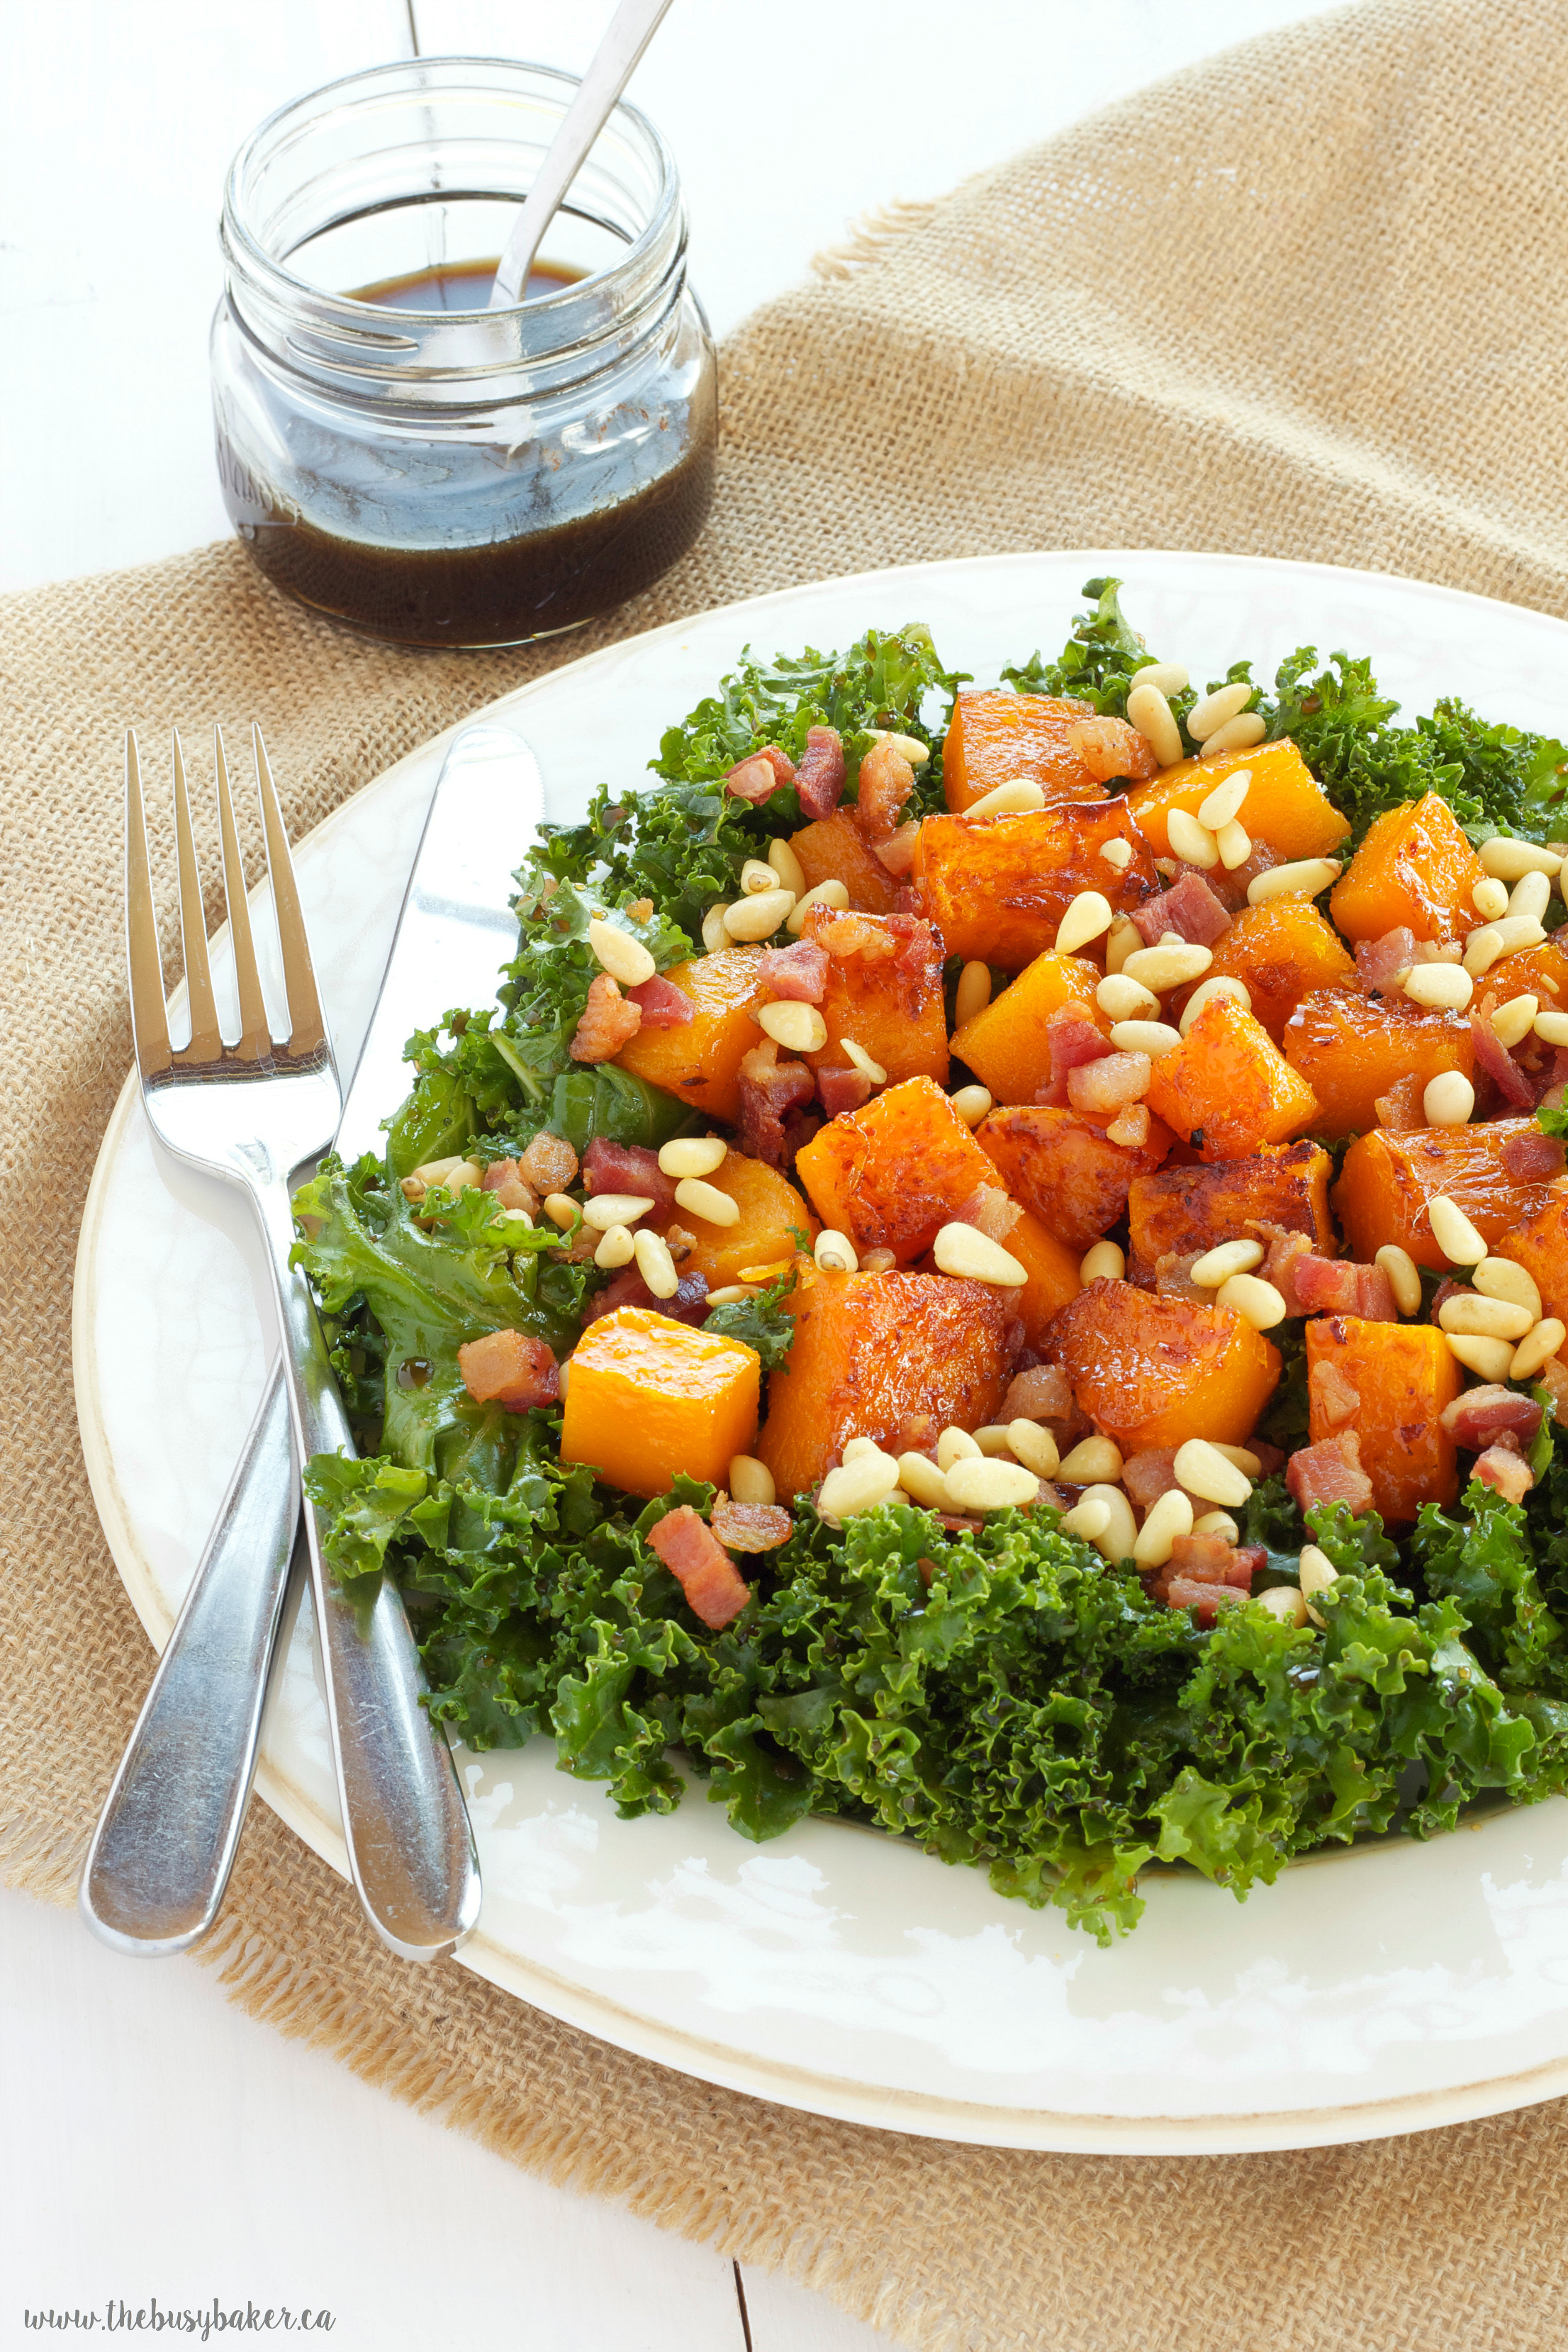 Warm Kale and Butternut Squash Salad with Bancetta